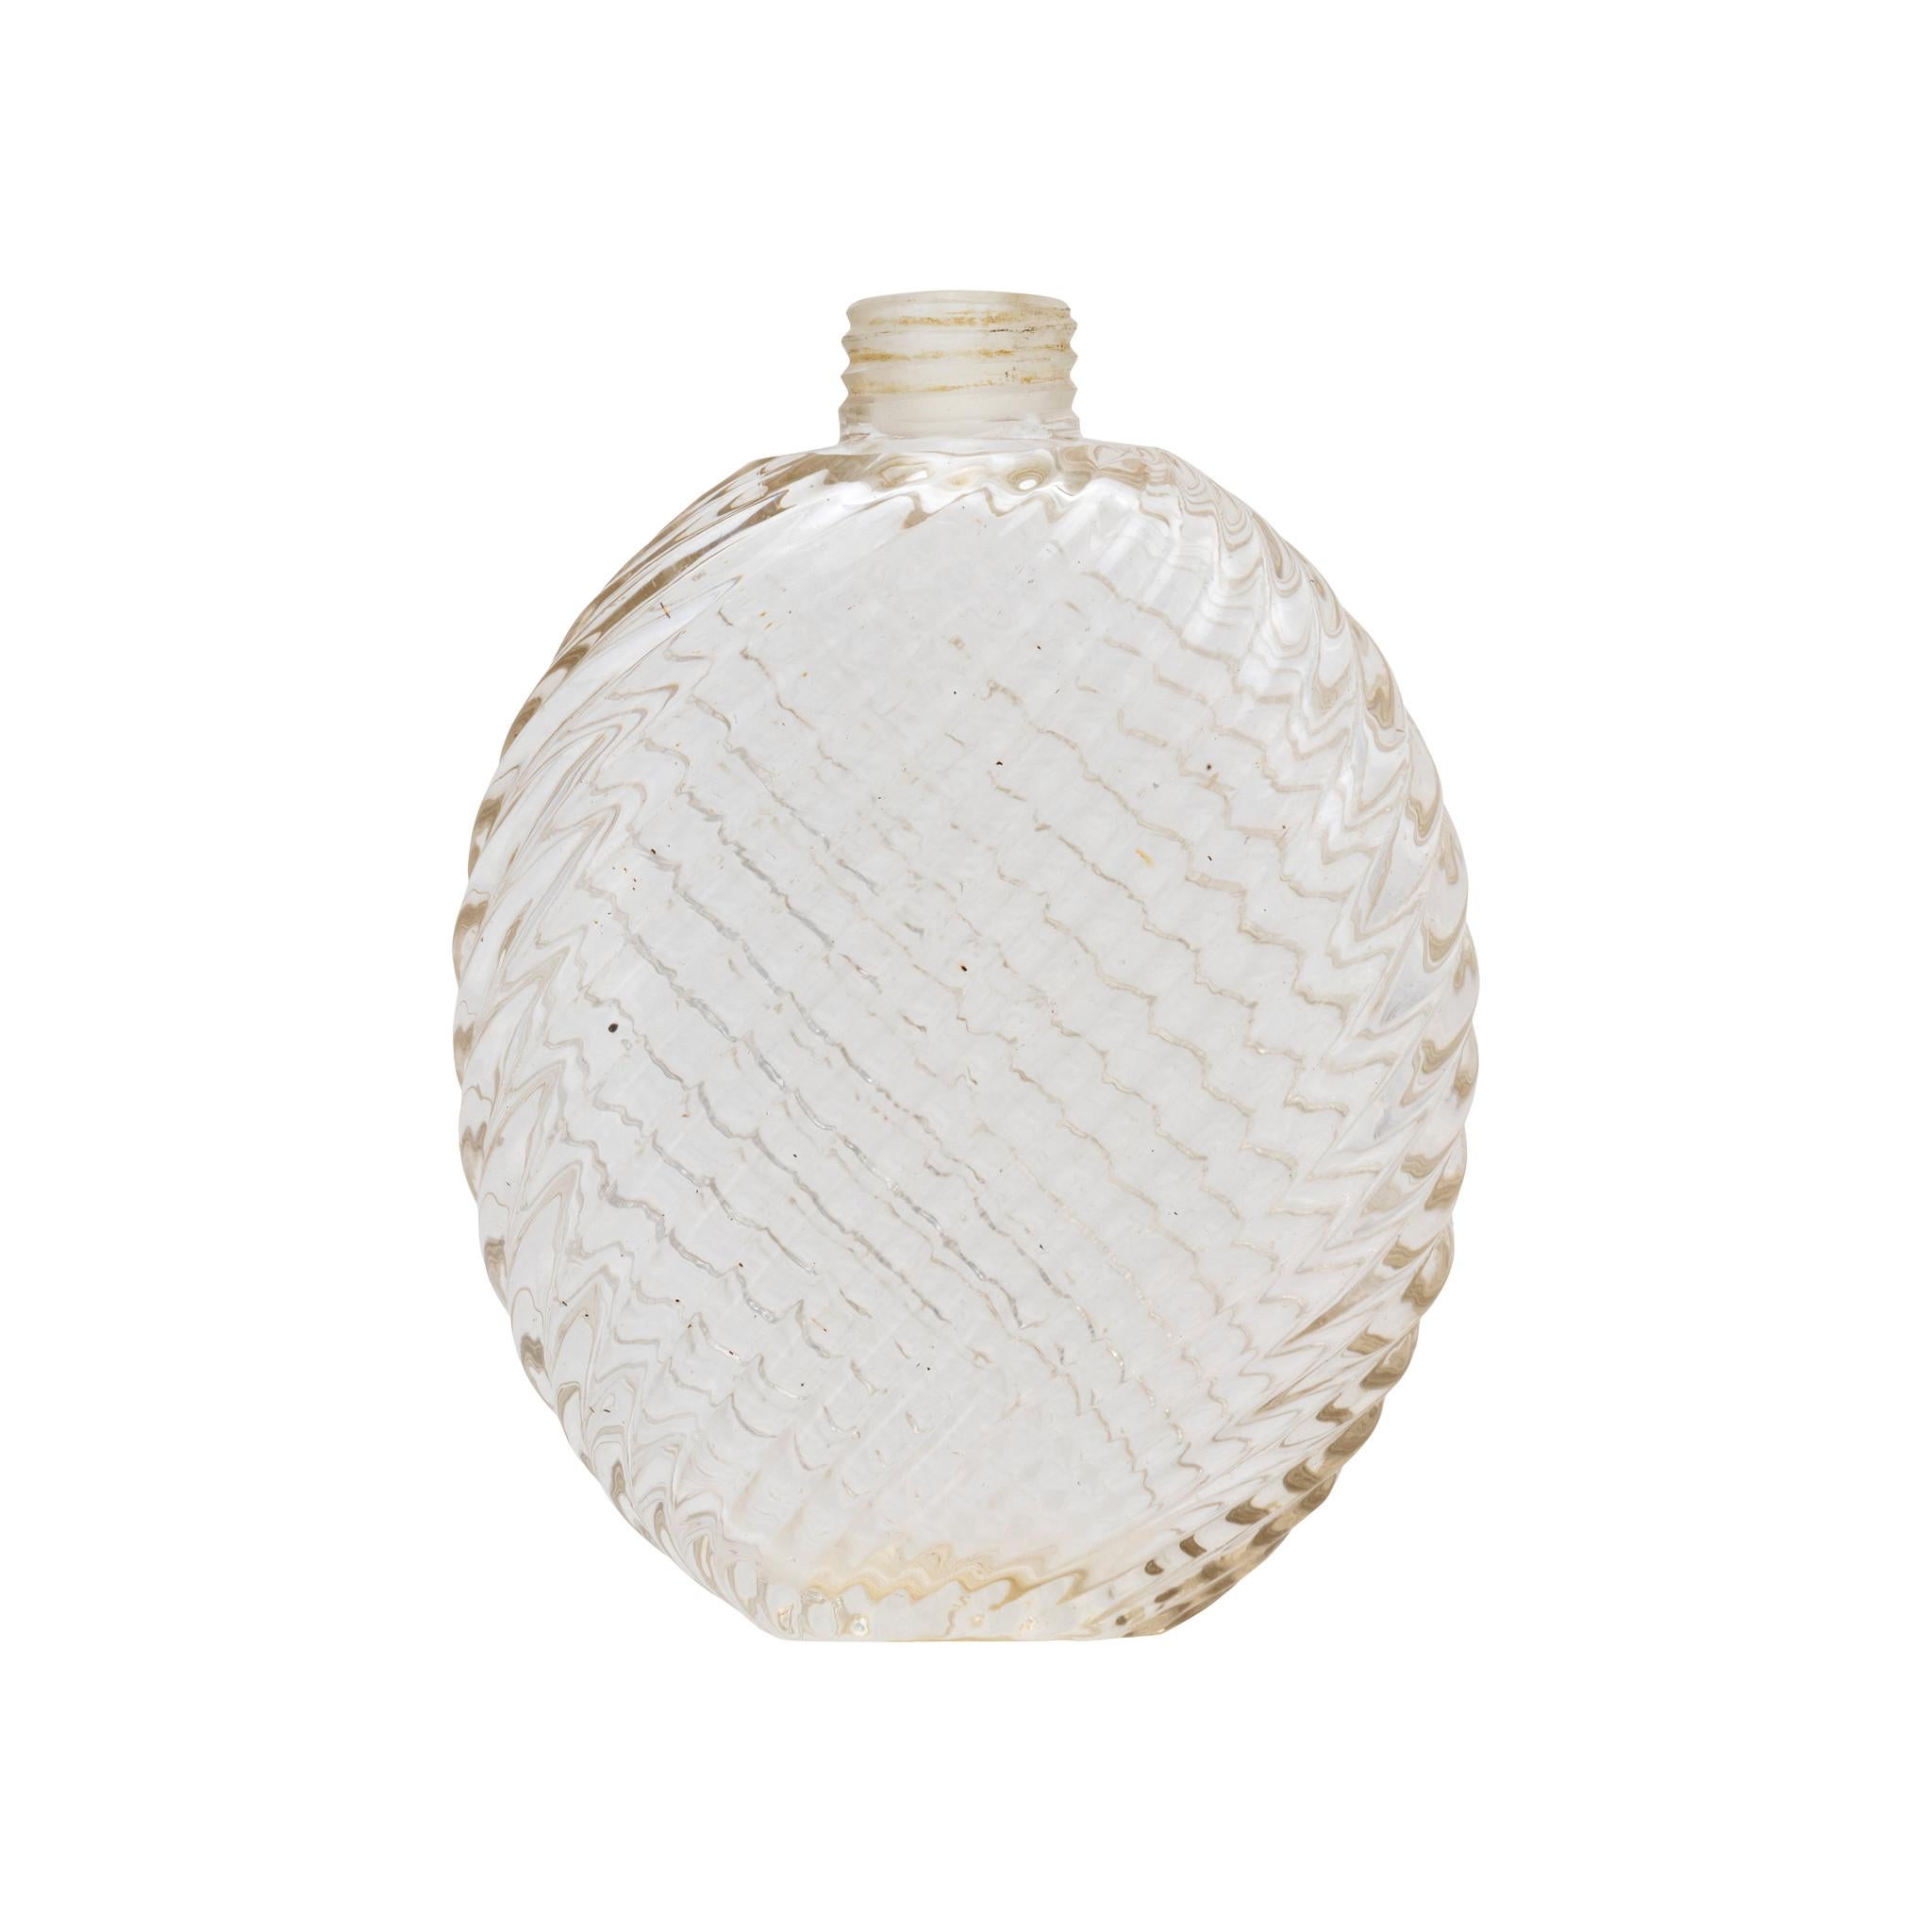 Ladies pressed glass flask with sterling silver cap. Flask itself is made fully of glass with flat bottom. An elegant swirling design is shaped into the glass using a manual pressing method to eliminate any seams. The design wraps completely around